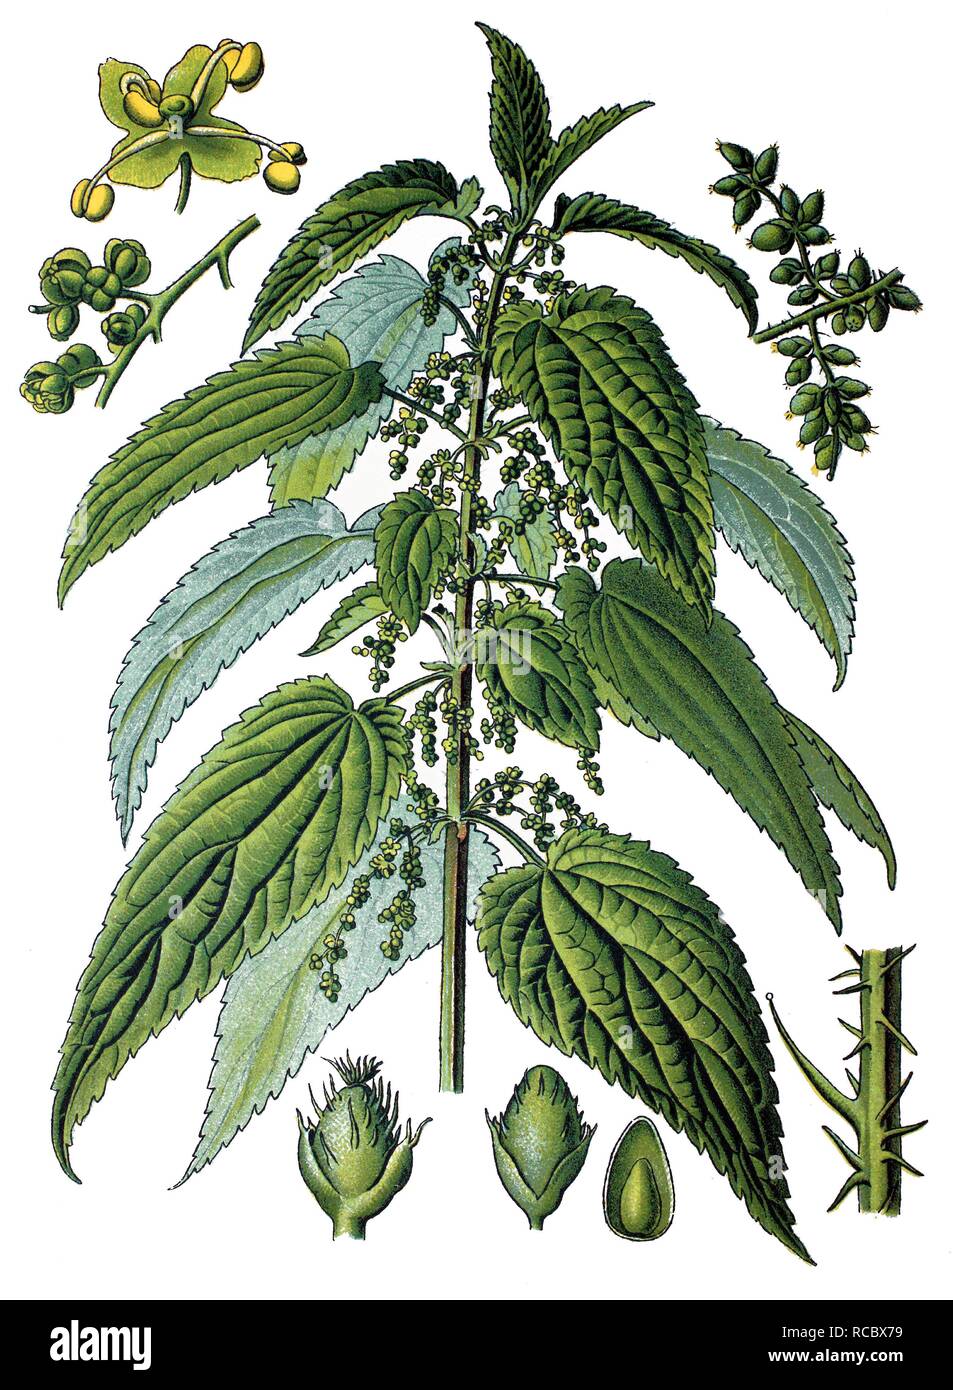 Stinging nettle (Urtica dioica), medicinal plant, historical chromolithography, 1870 Stock Photo